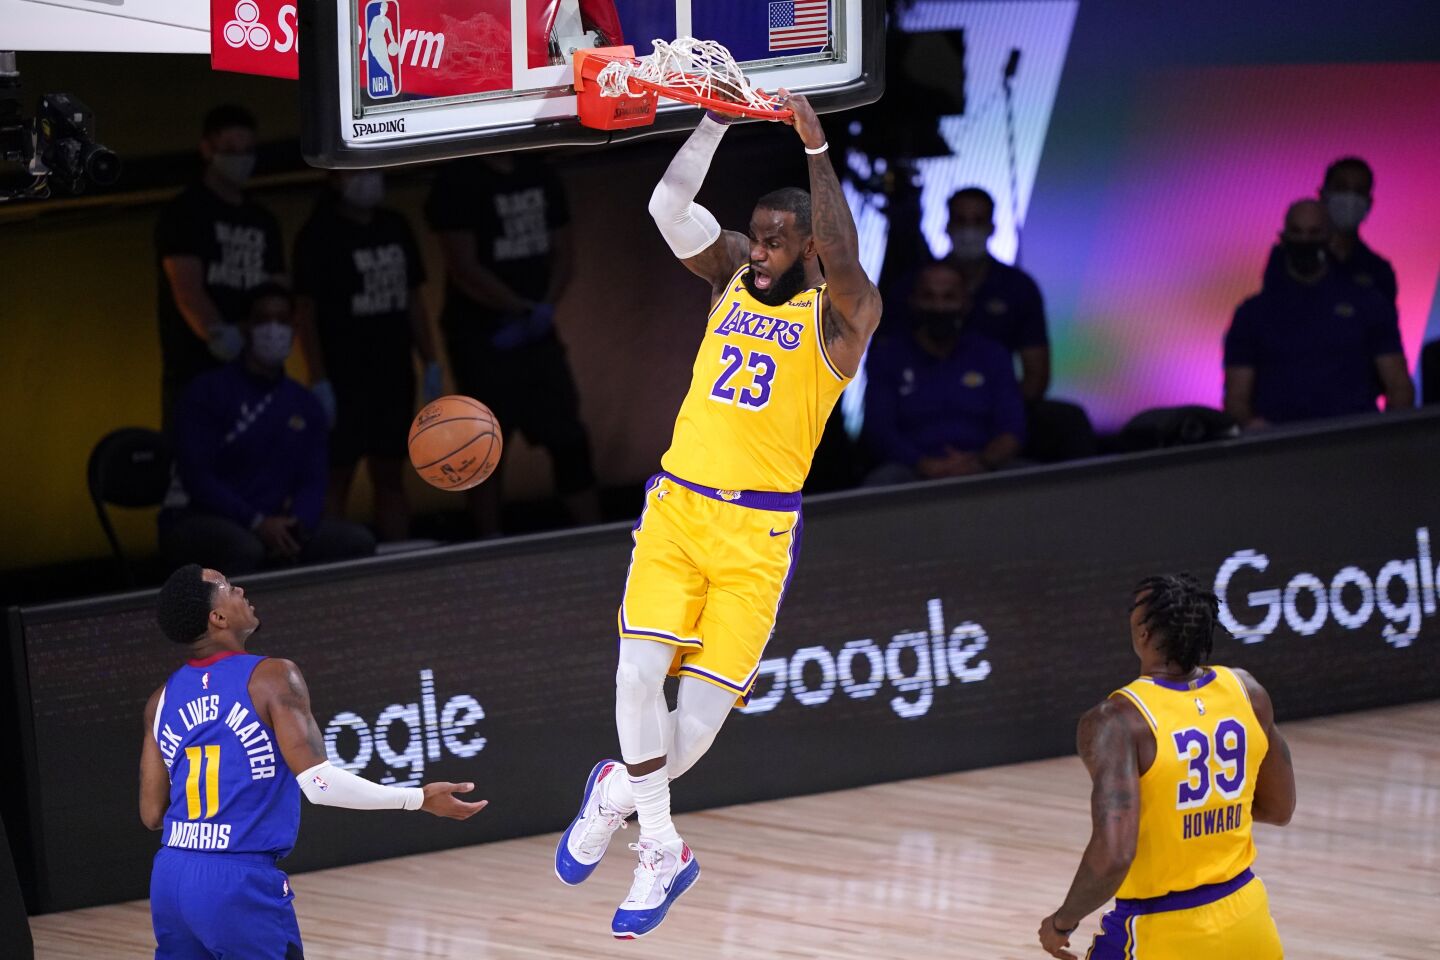 Lakers forward LeBron James finishes off a dunk against the Nuggets during Game 1 of the Western Conference finals.